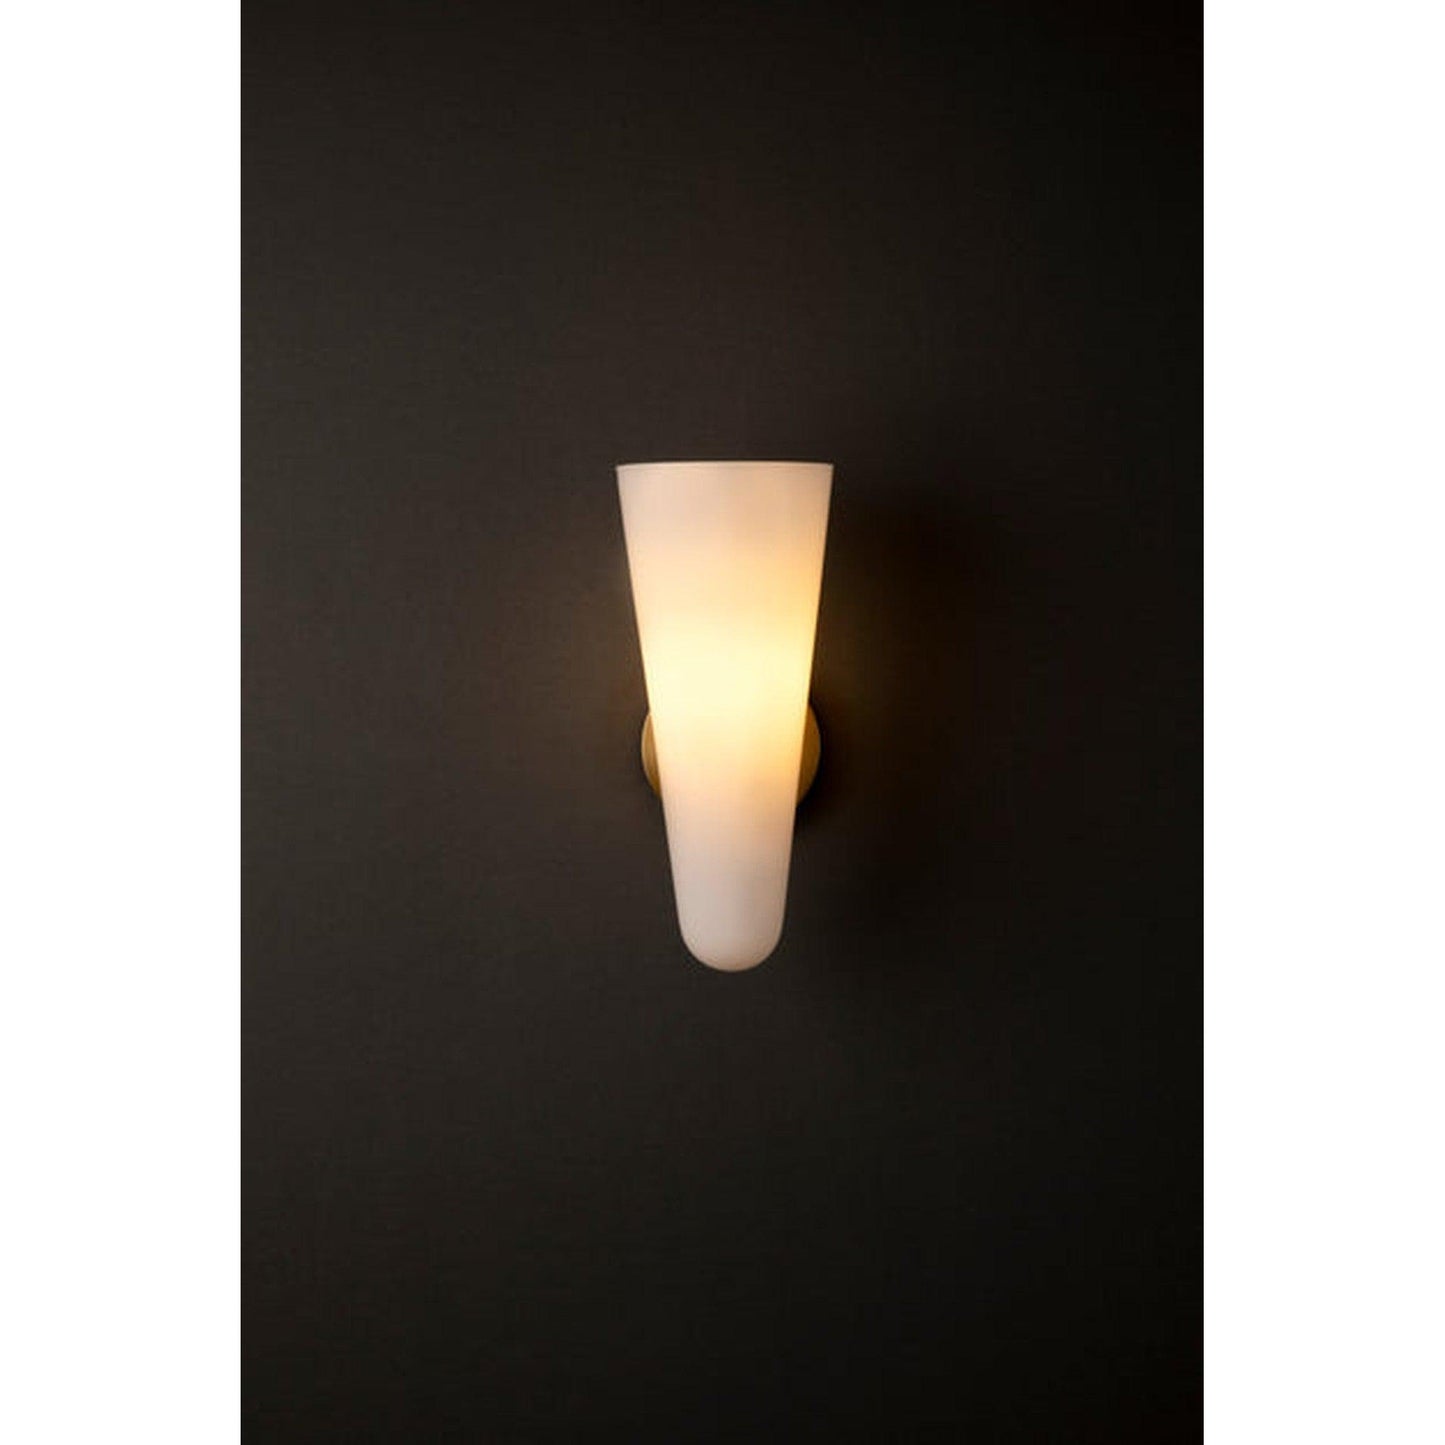 The Vault Sawyer Wall Sconce